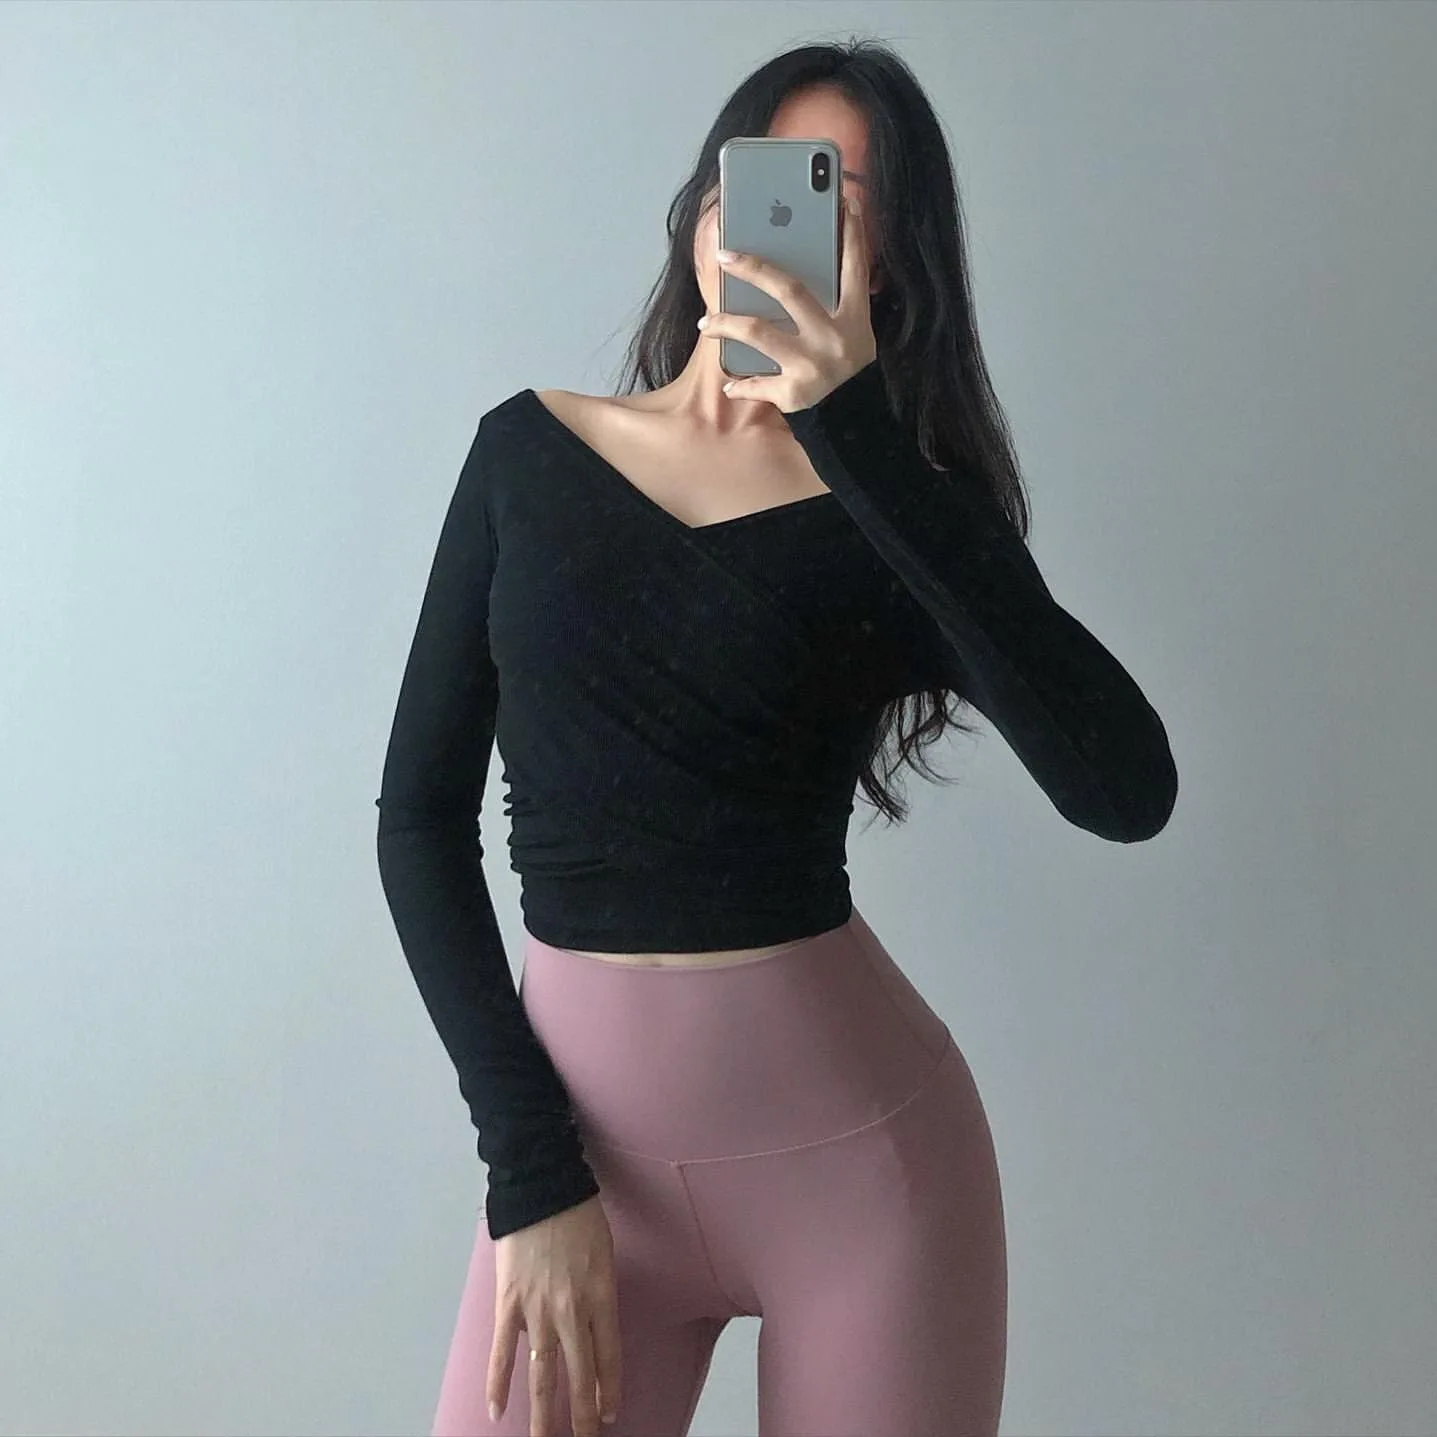 New Nude High Waist Breathable Yoga Pants Women Anti-Curl Quick